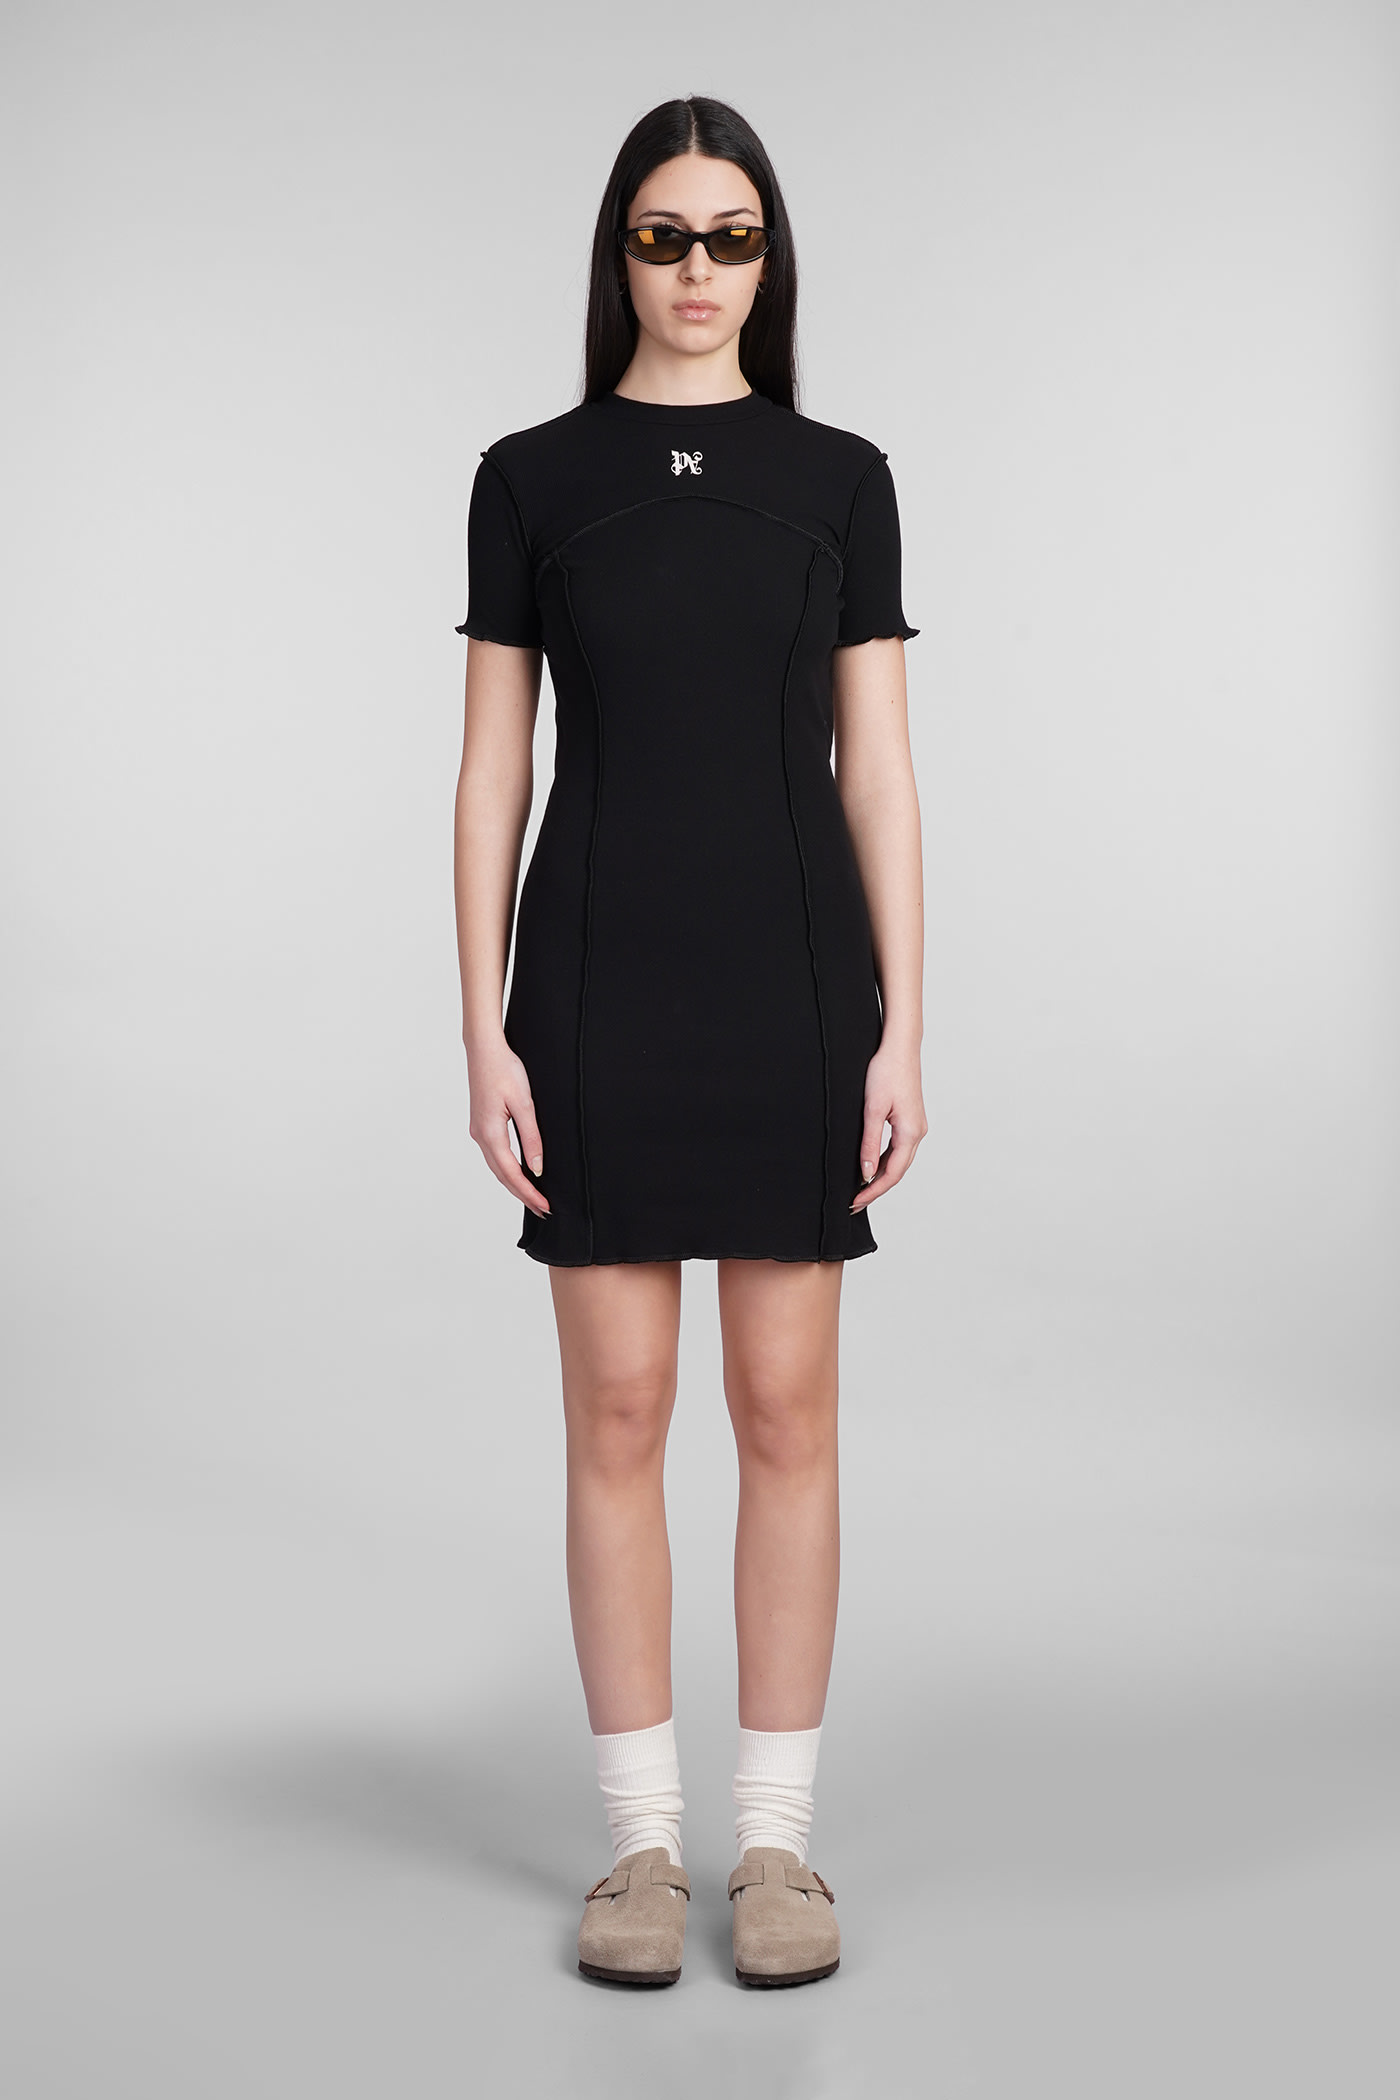 Palm Angels Dress In Black Cotton